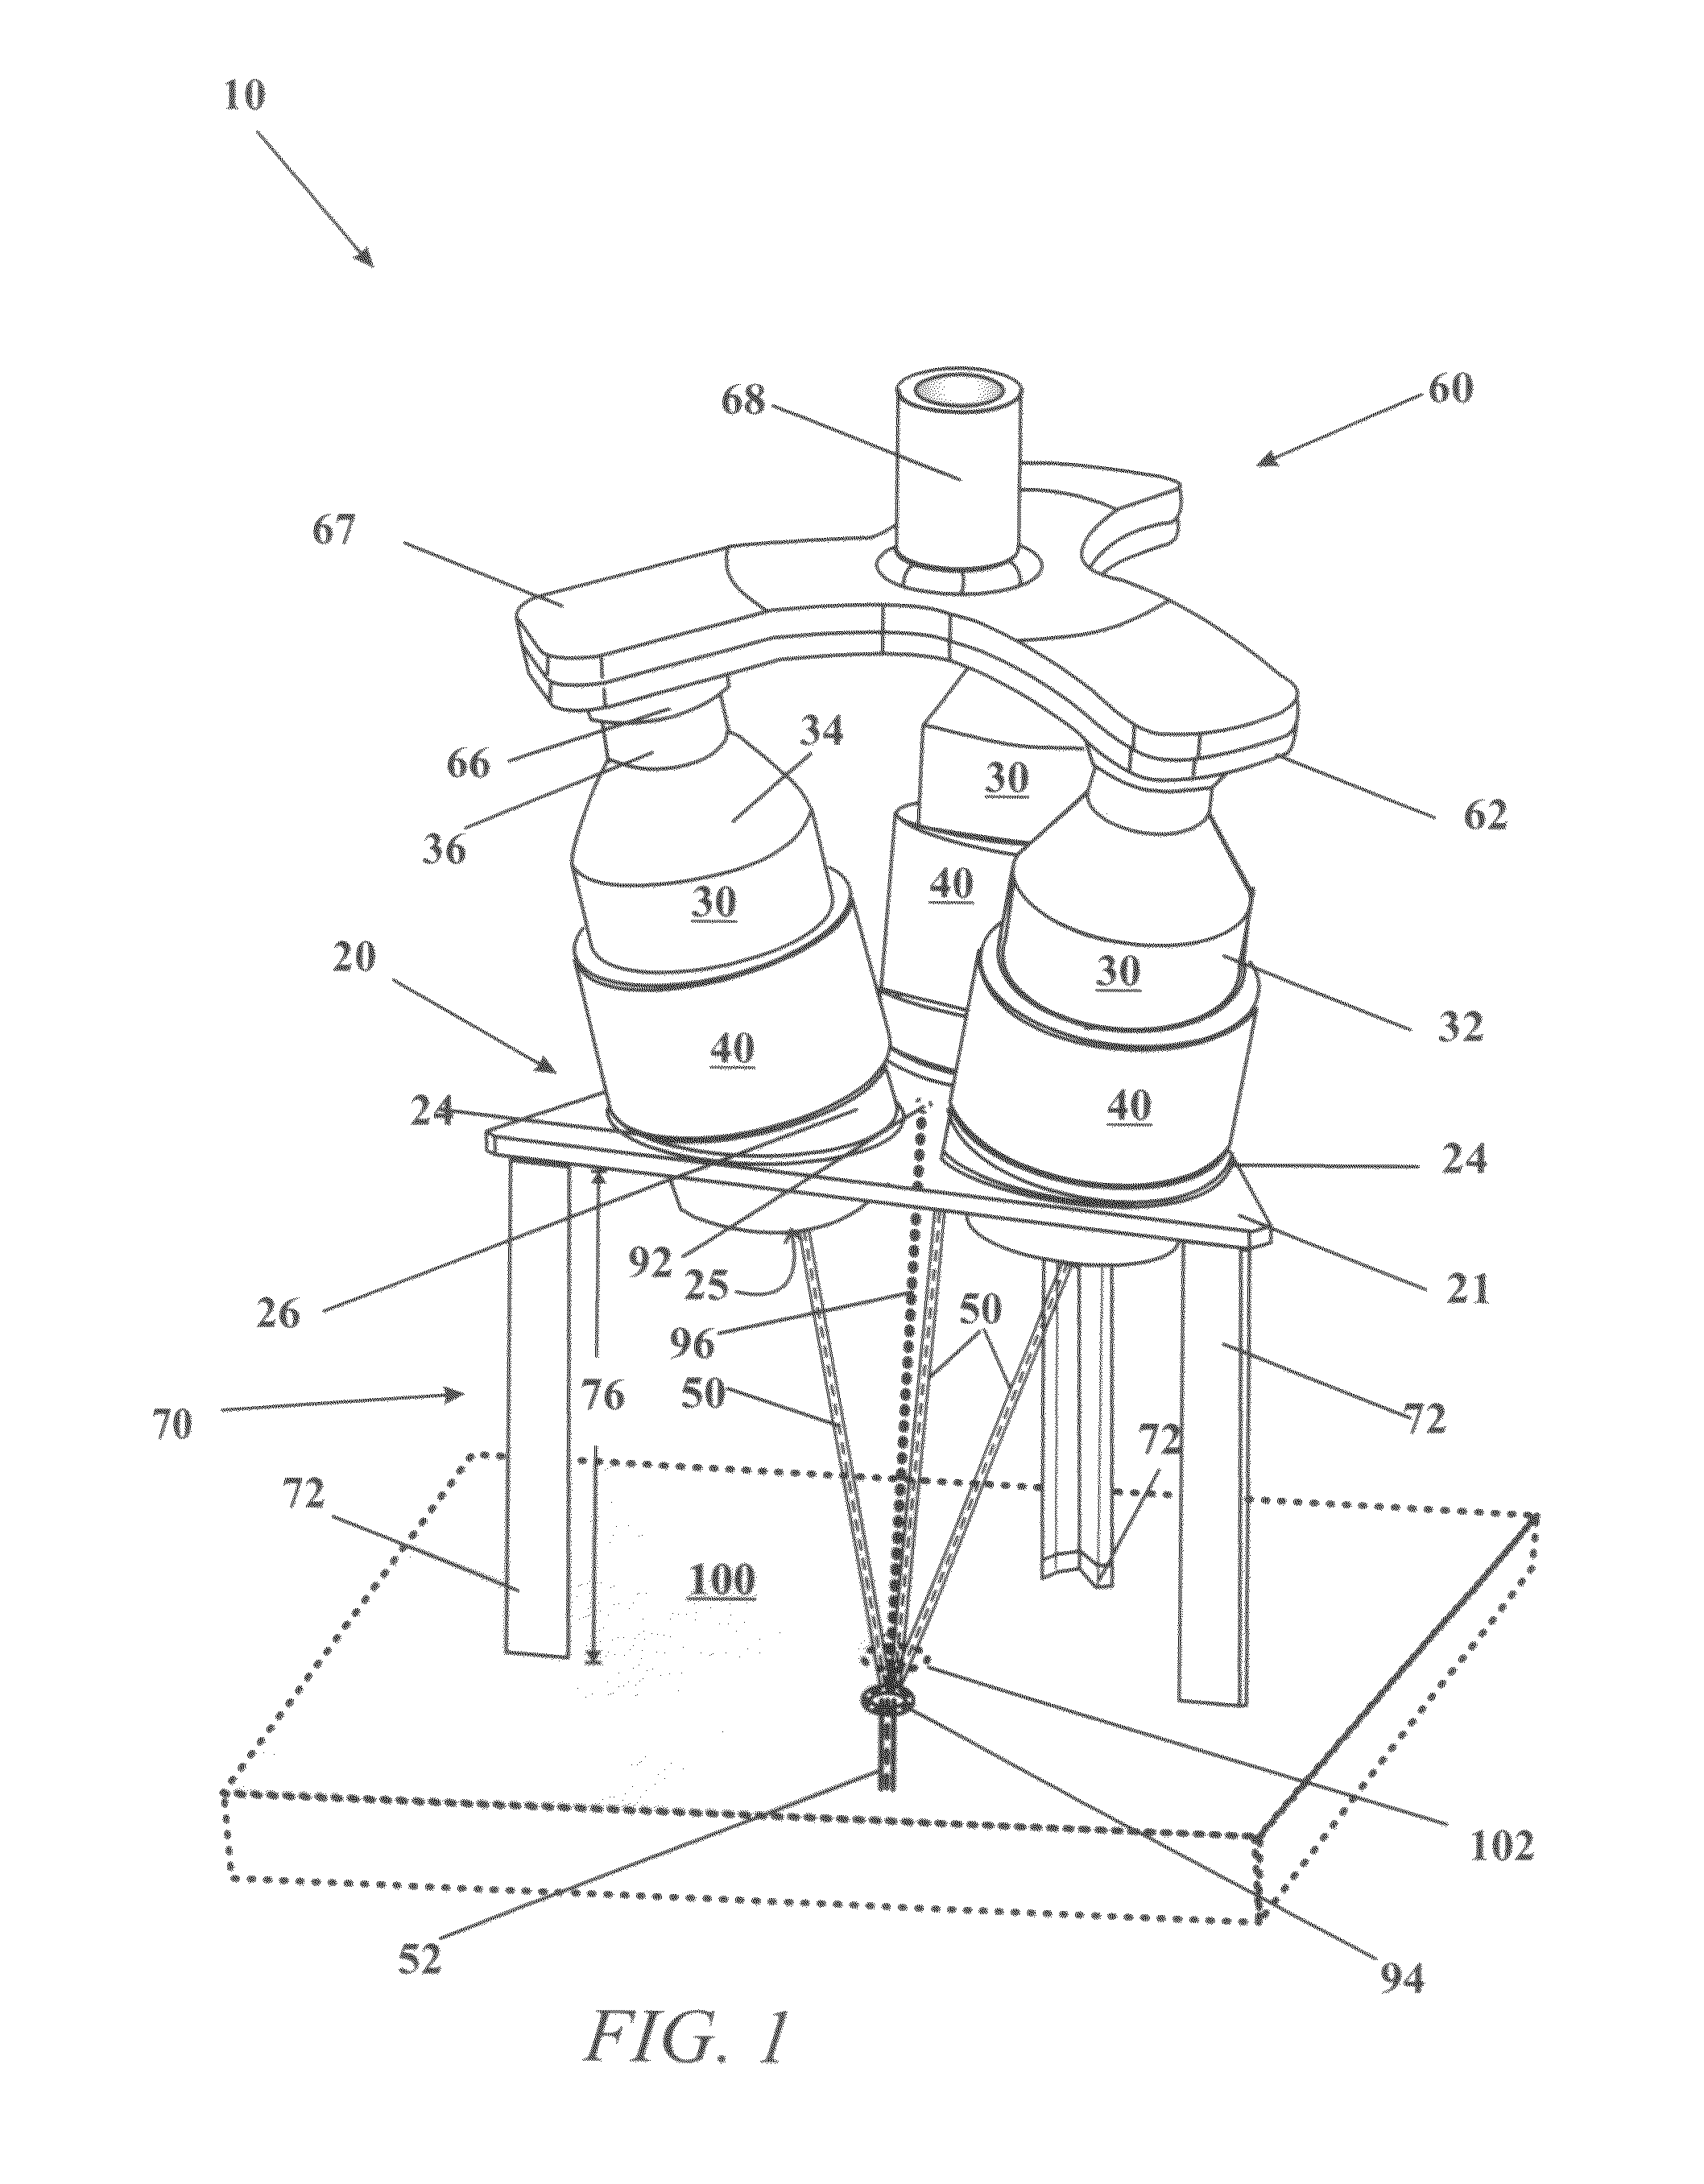 Holder that converges jets created by a plurality of shape charges